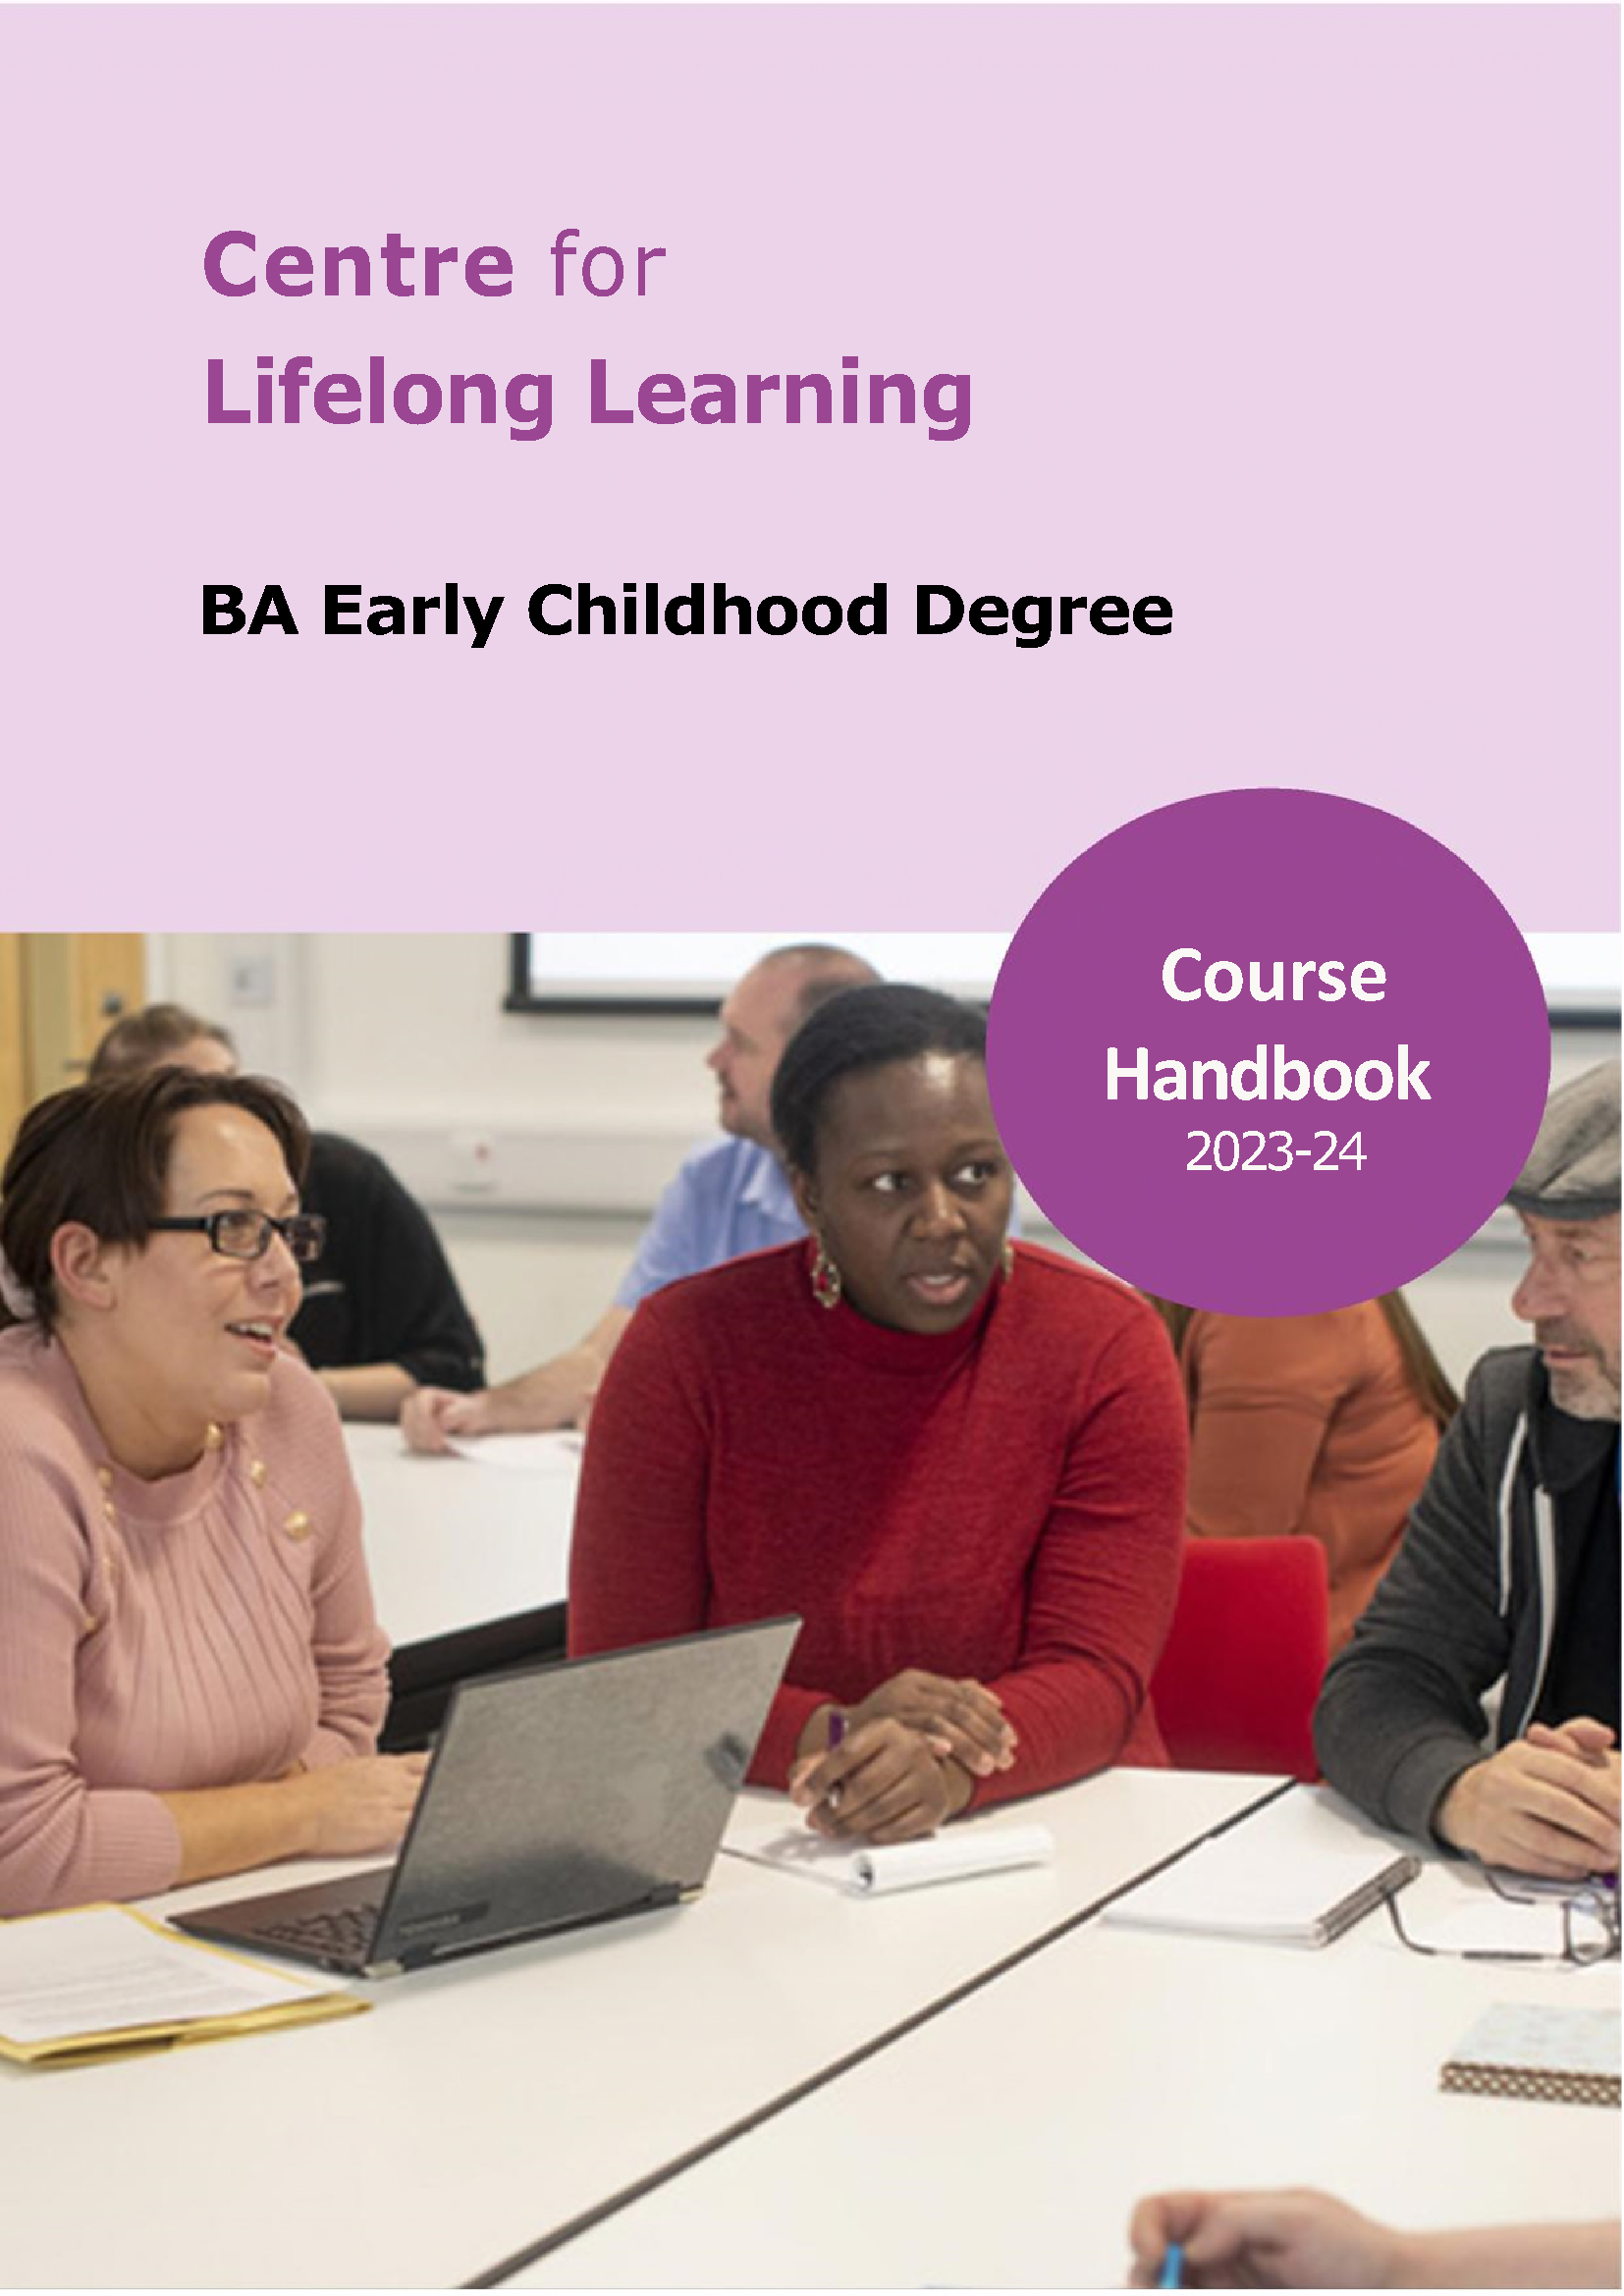 BA Early Childhood Degree Handbook, Front Cover